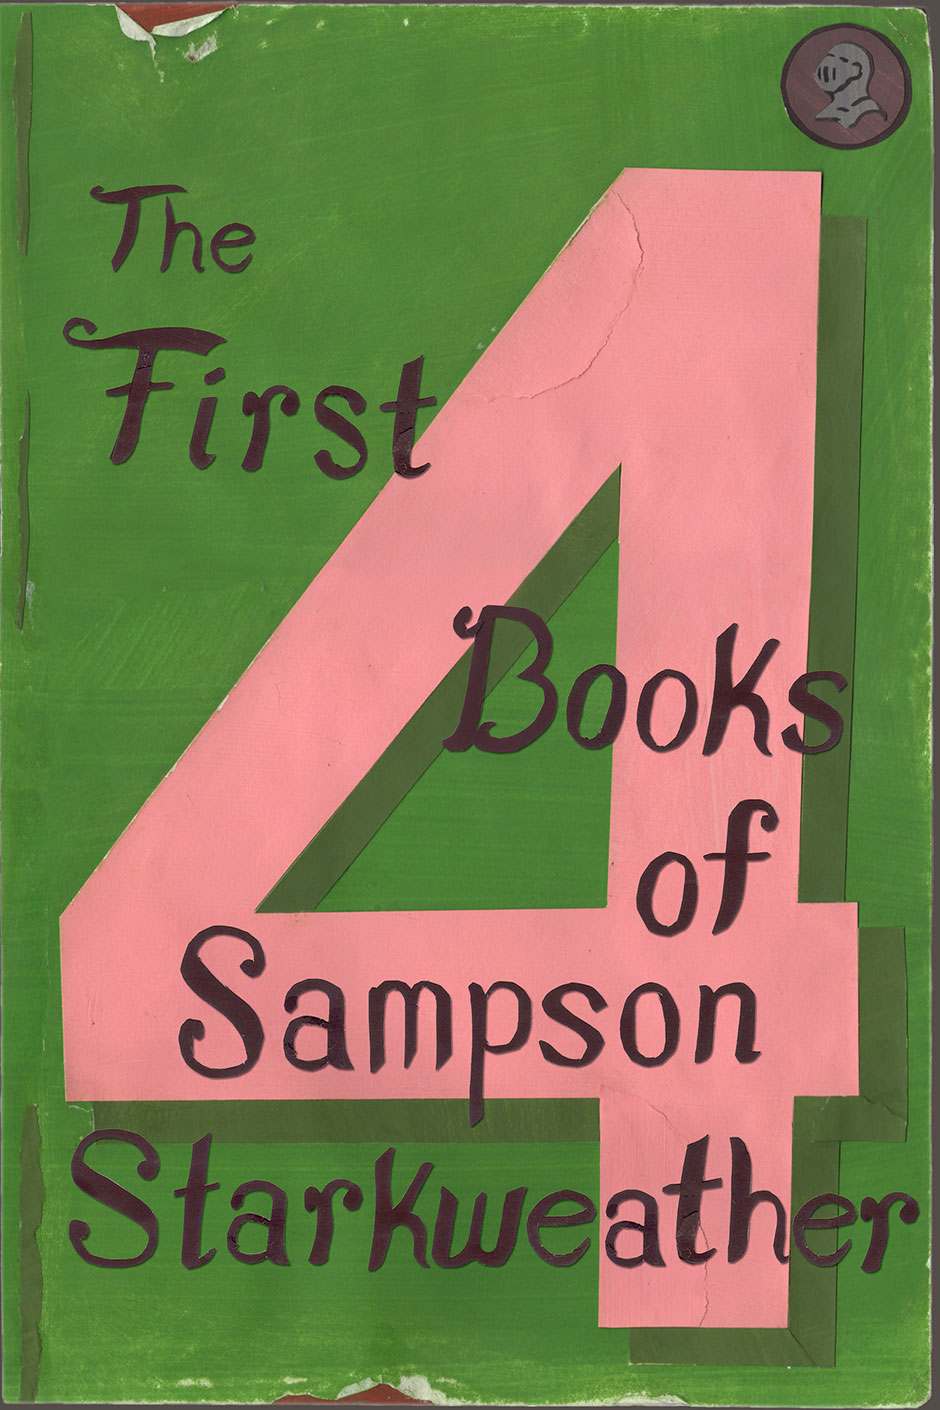 The First 4 Books of Sampson Starkweather